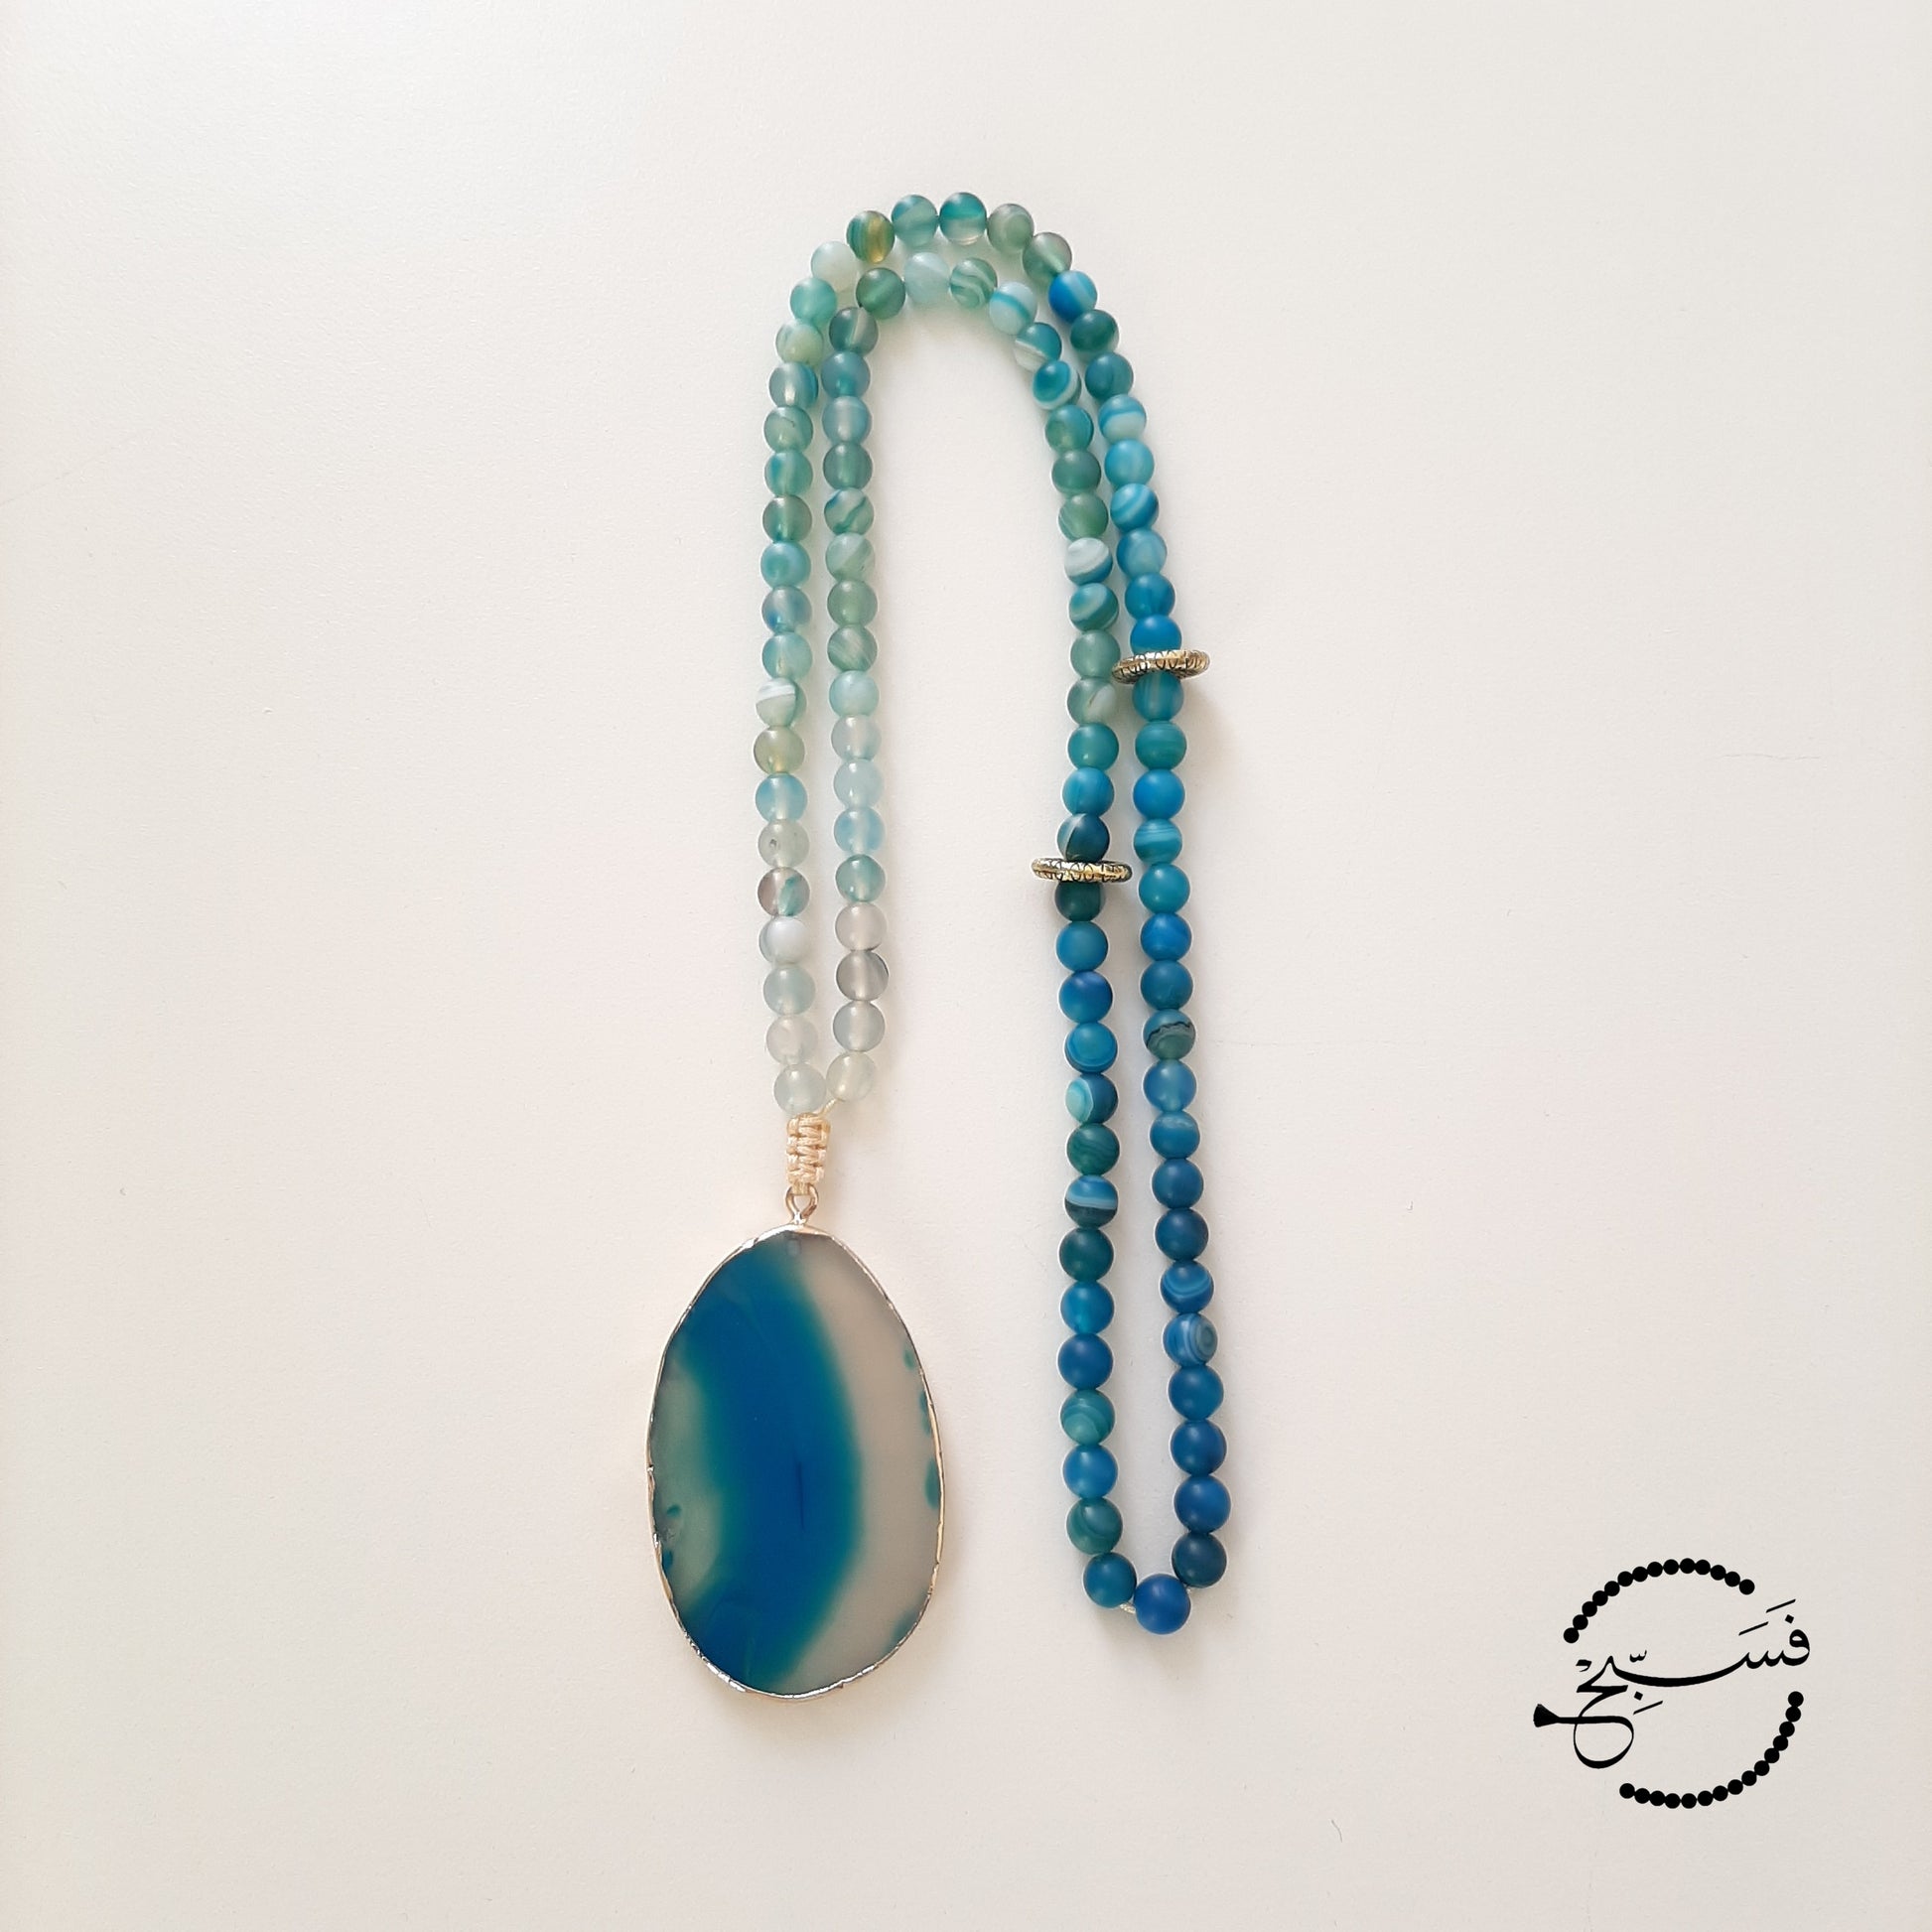 Smooth blue agate pendant and beads.  Packaged in a luxurious pouch and a gift box.  99 beads